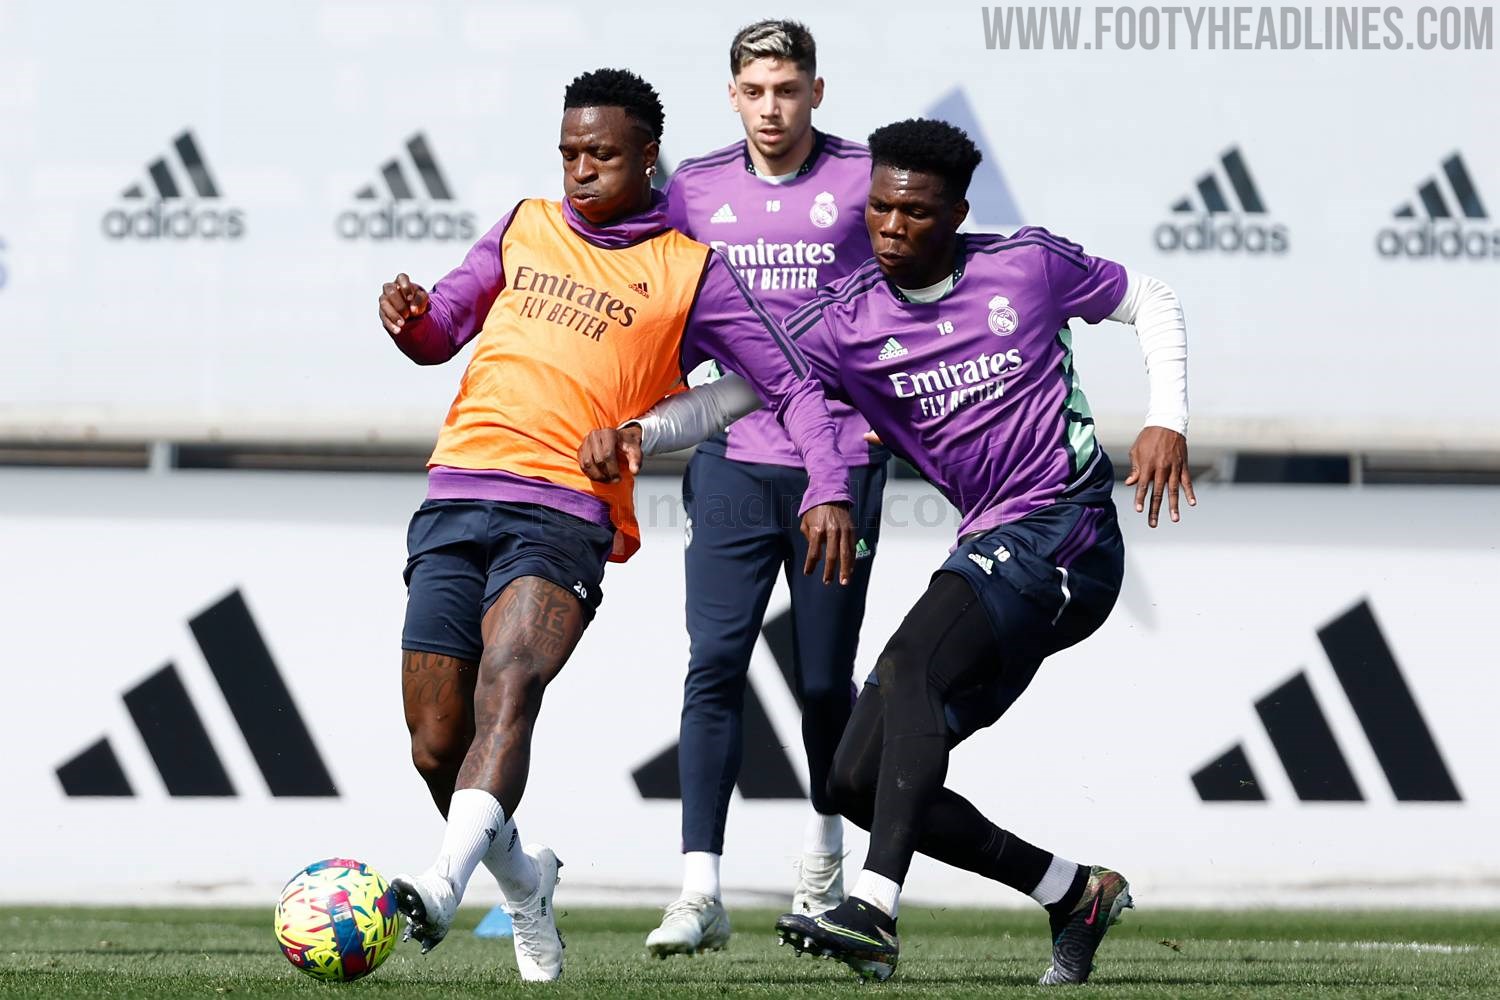 Vinicius Jr Trains Total White Boots - Wants to Nike - Footy Headlines